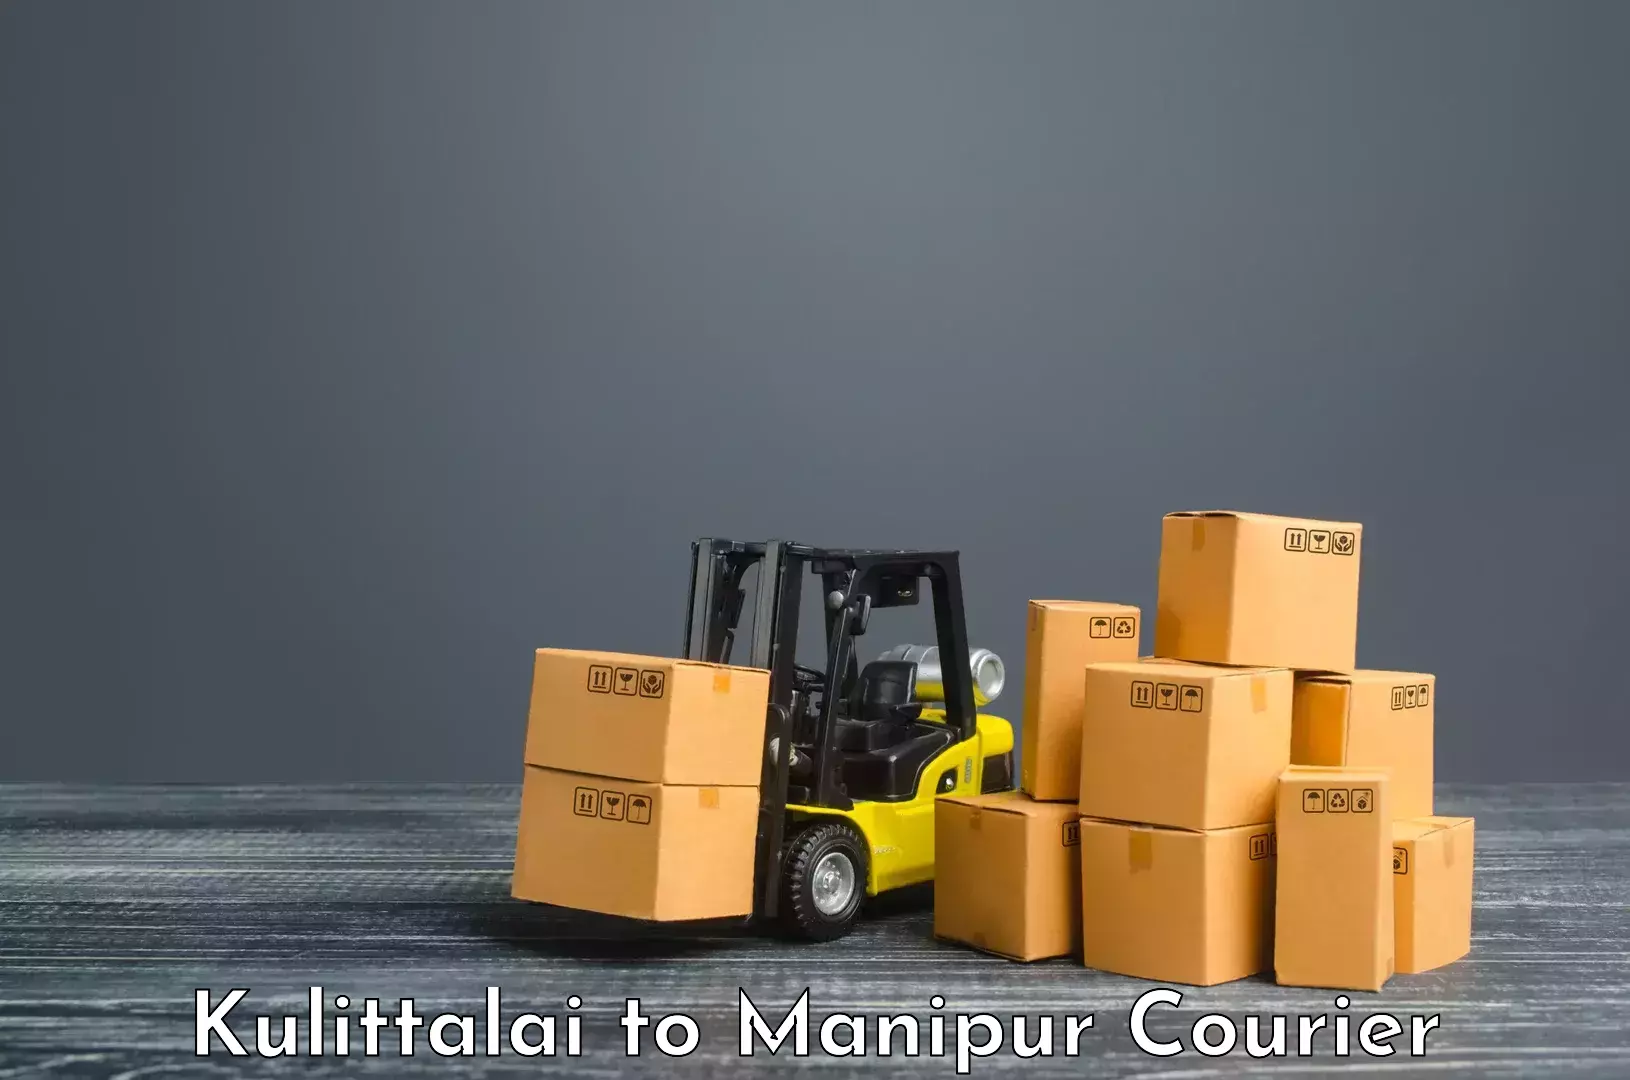 Comprehensive shipping network Kulittalai to Manipur